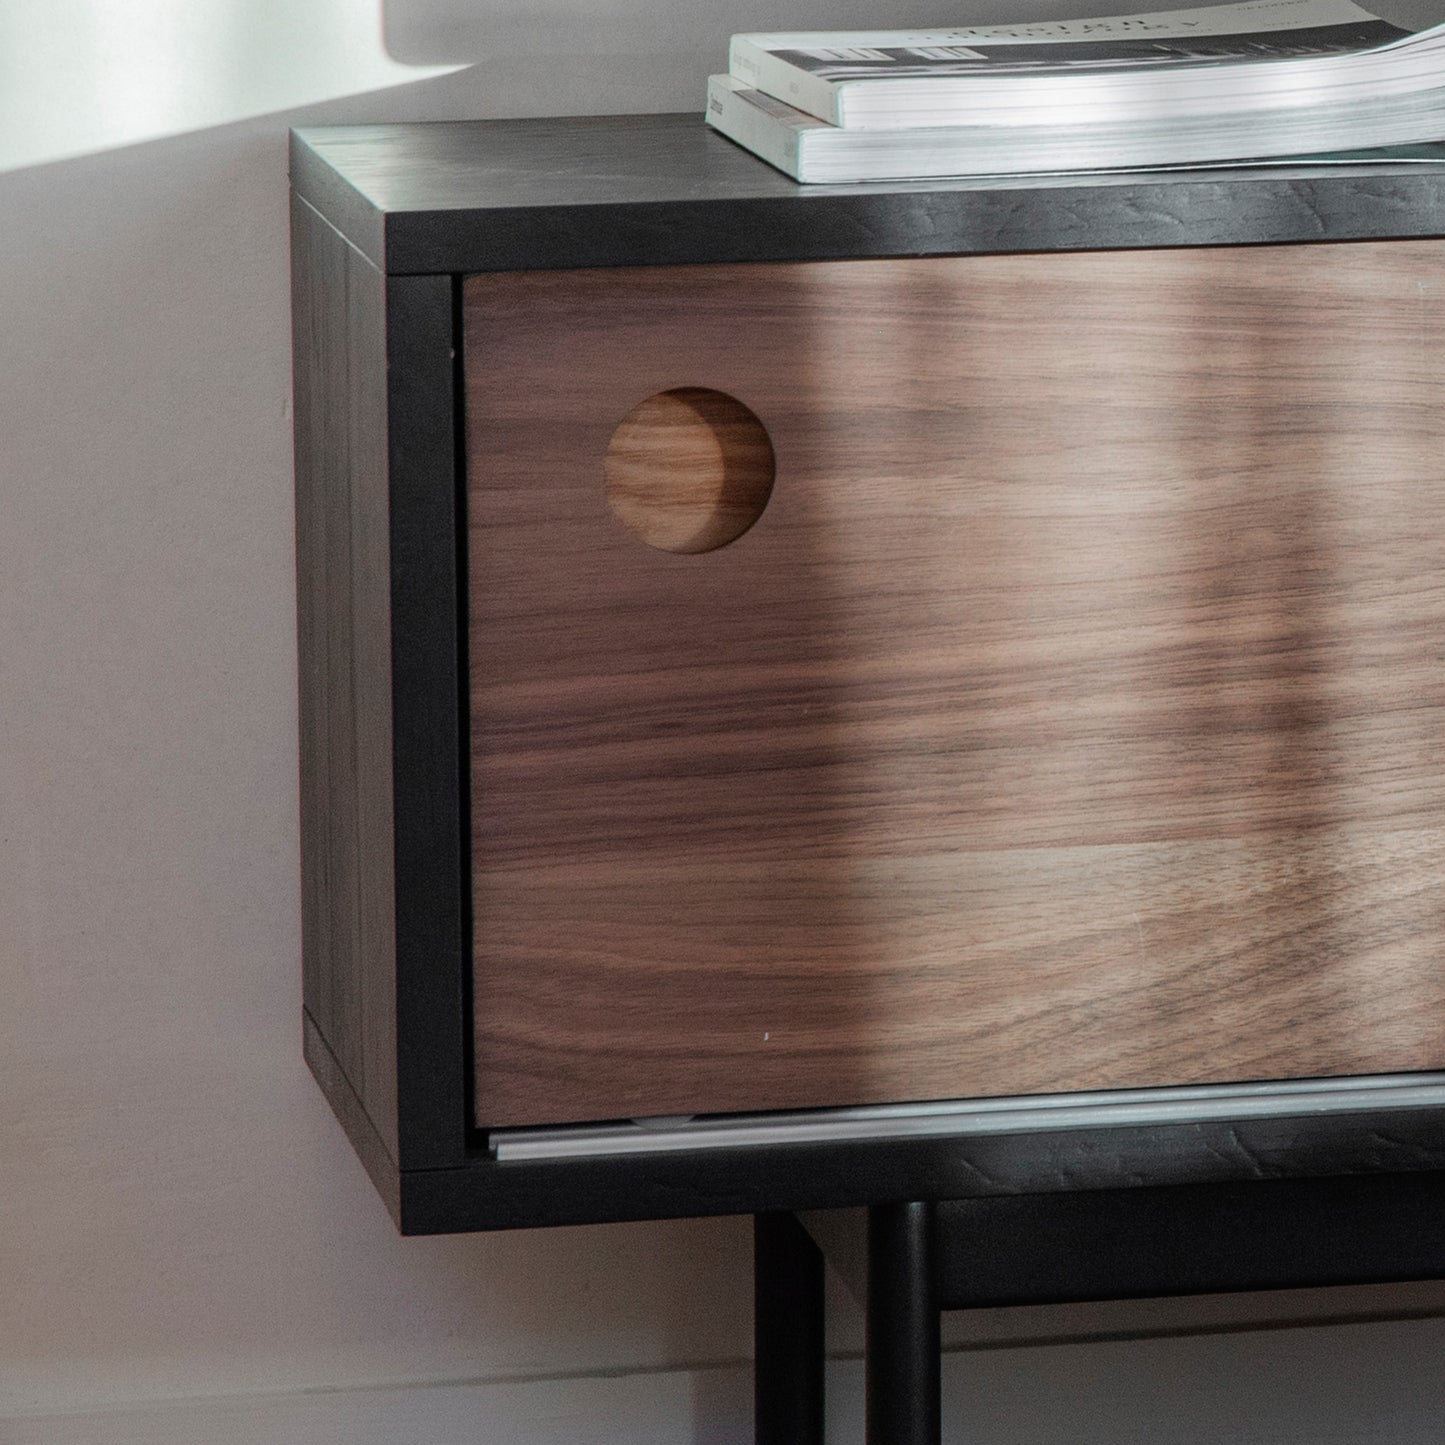 A Barbican Media Unit with a hole in the middle, perfect for interior decor and home furniture.